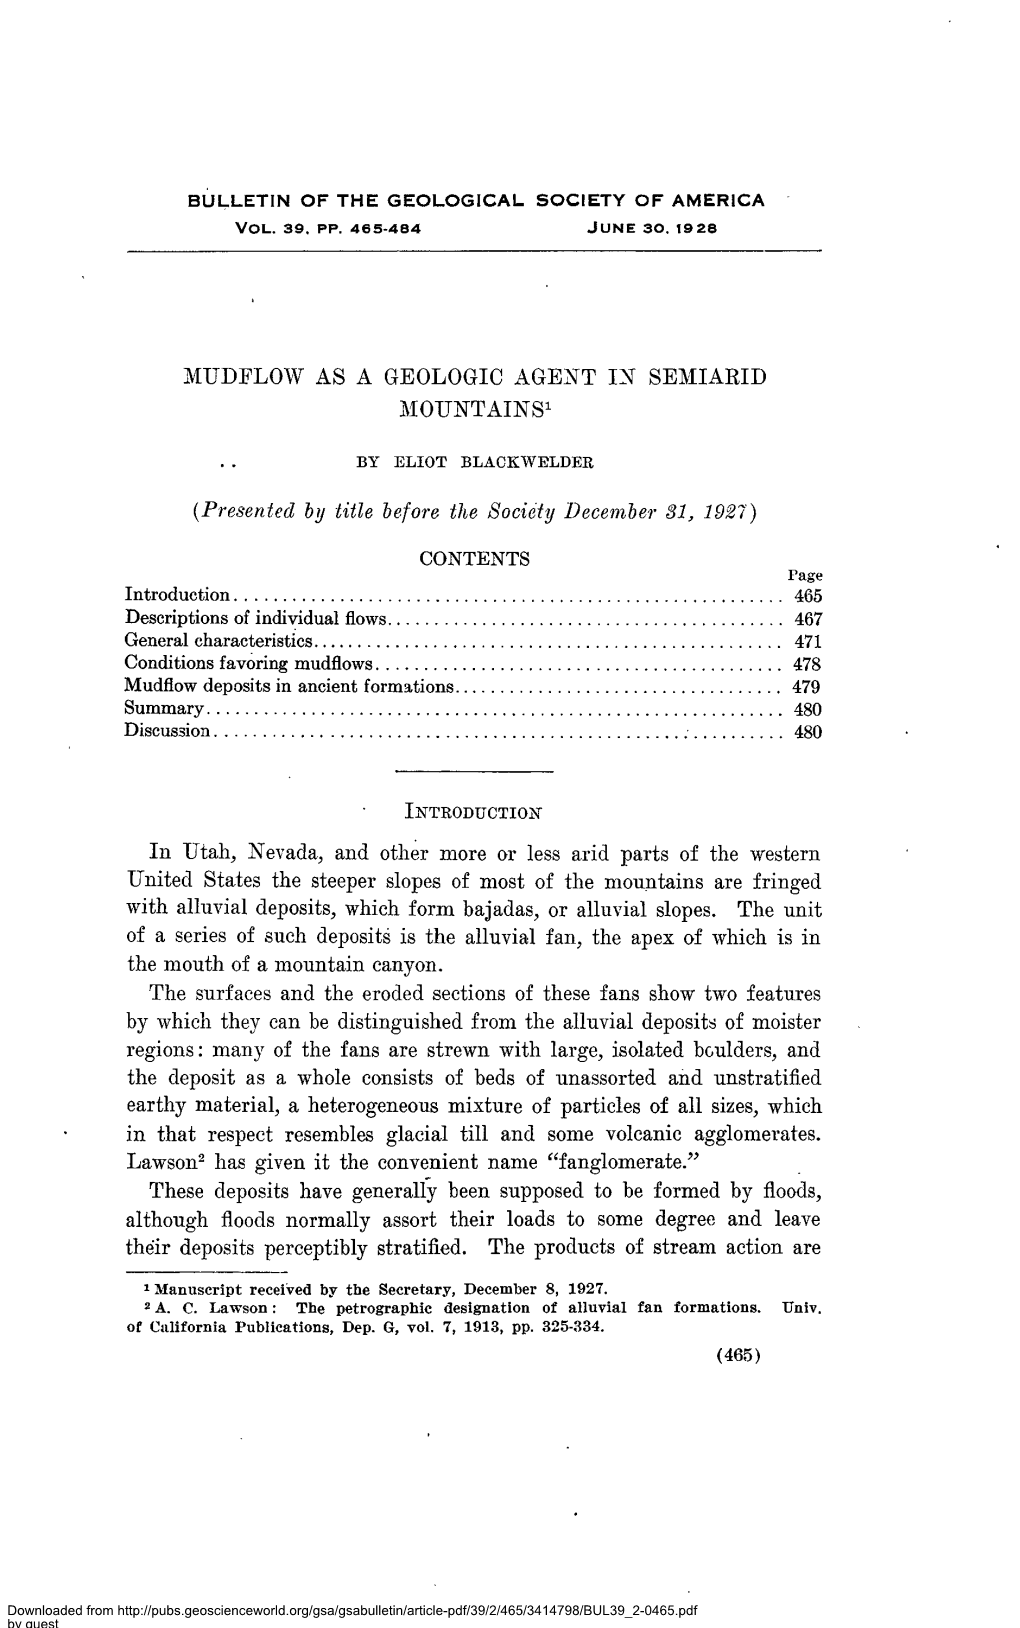 MUDFLOW AS a GEOLOGIC AGENT in SEMIARID MOUNTAINS1 by ELIOT BLACKWELDER (.Presented by Title Before the Society December SI, 1927) CONTENTS Page Introduction